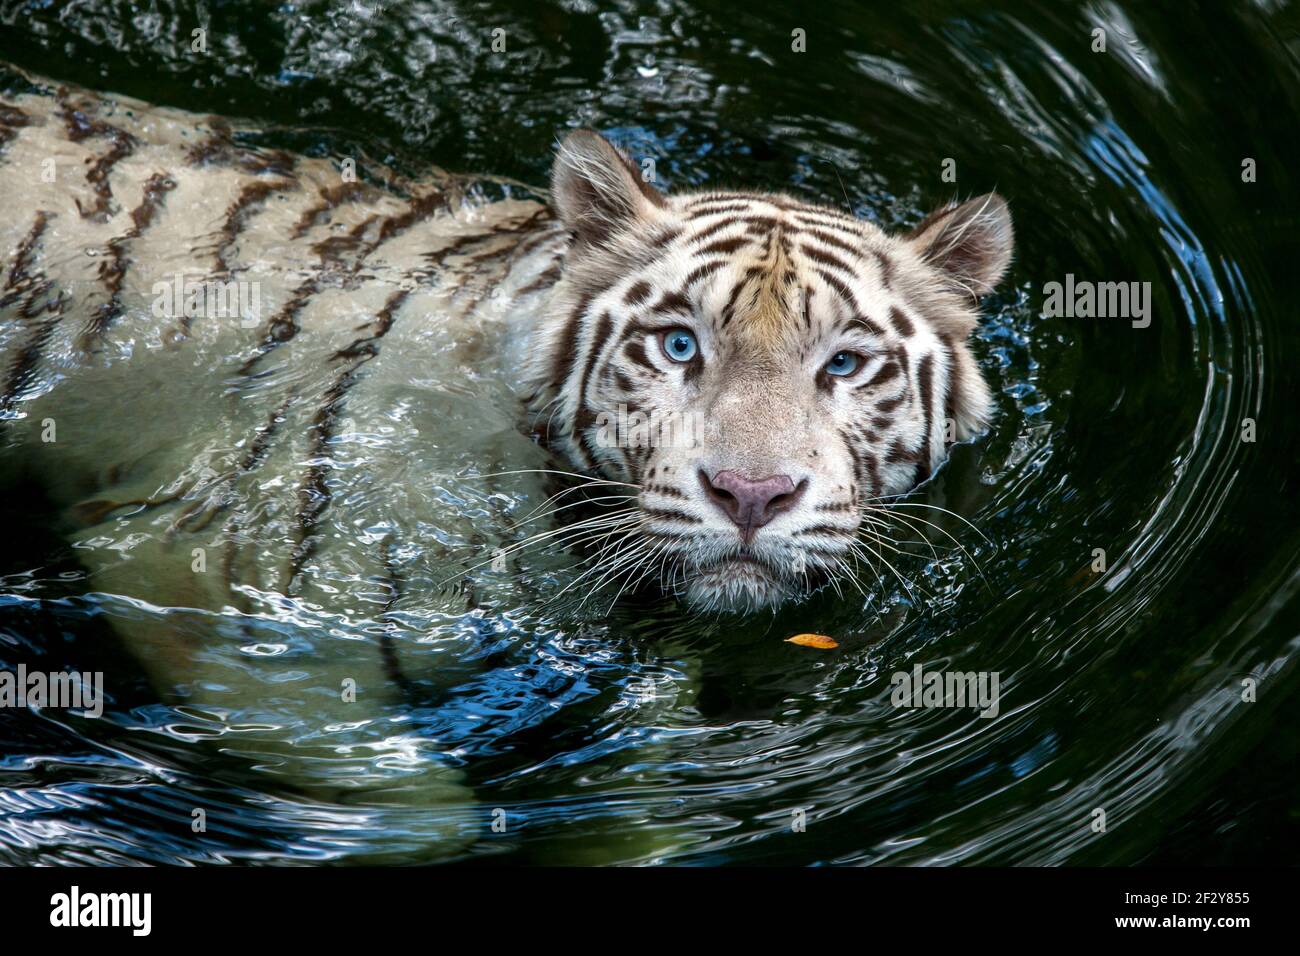 A white tiger at Singapore Zoo swimming in the moat surrounding its enclosure. This tiger is particularly fond of diving into the moat. Stock Photo